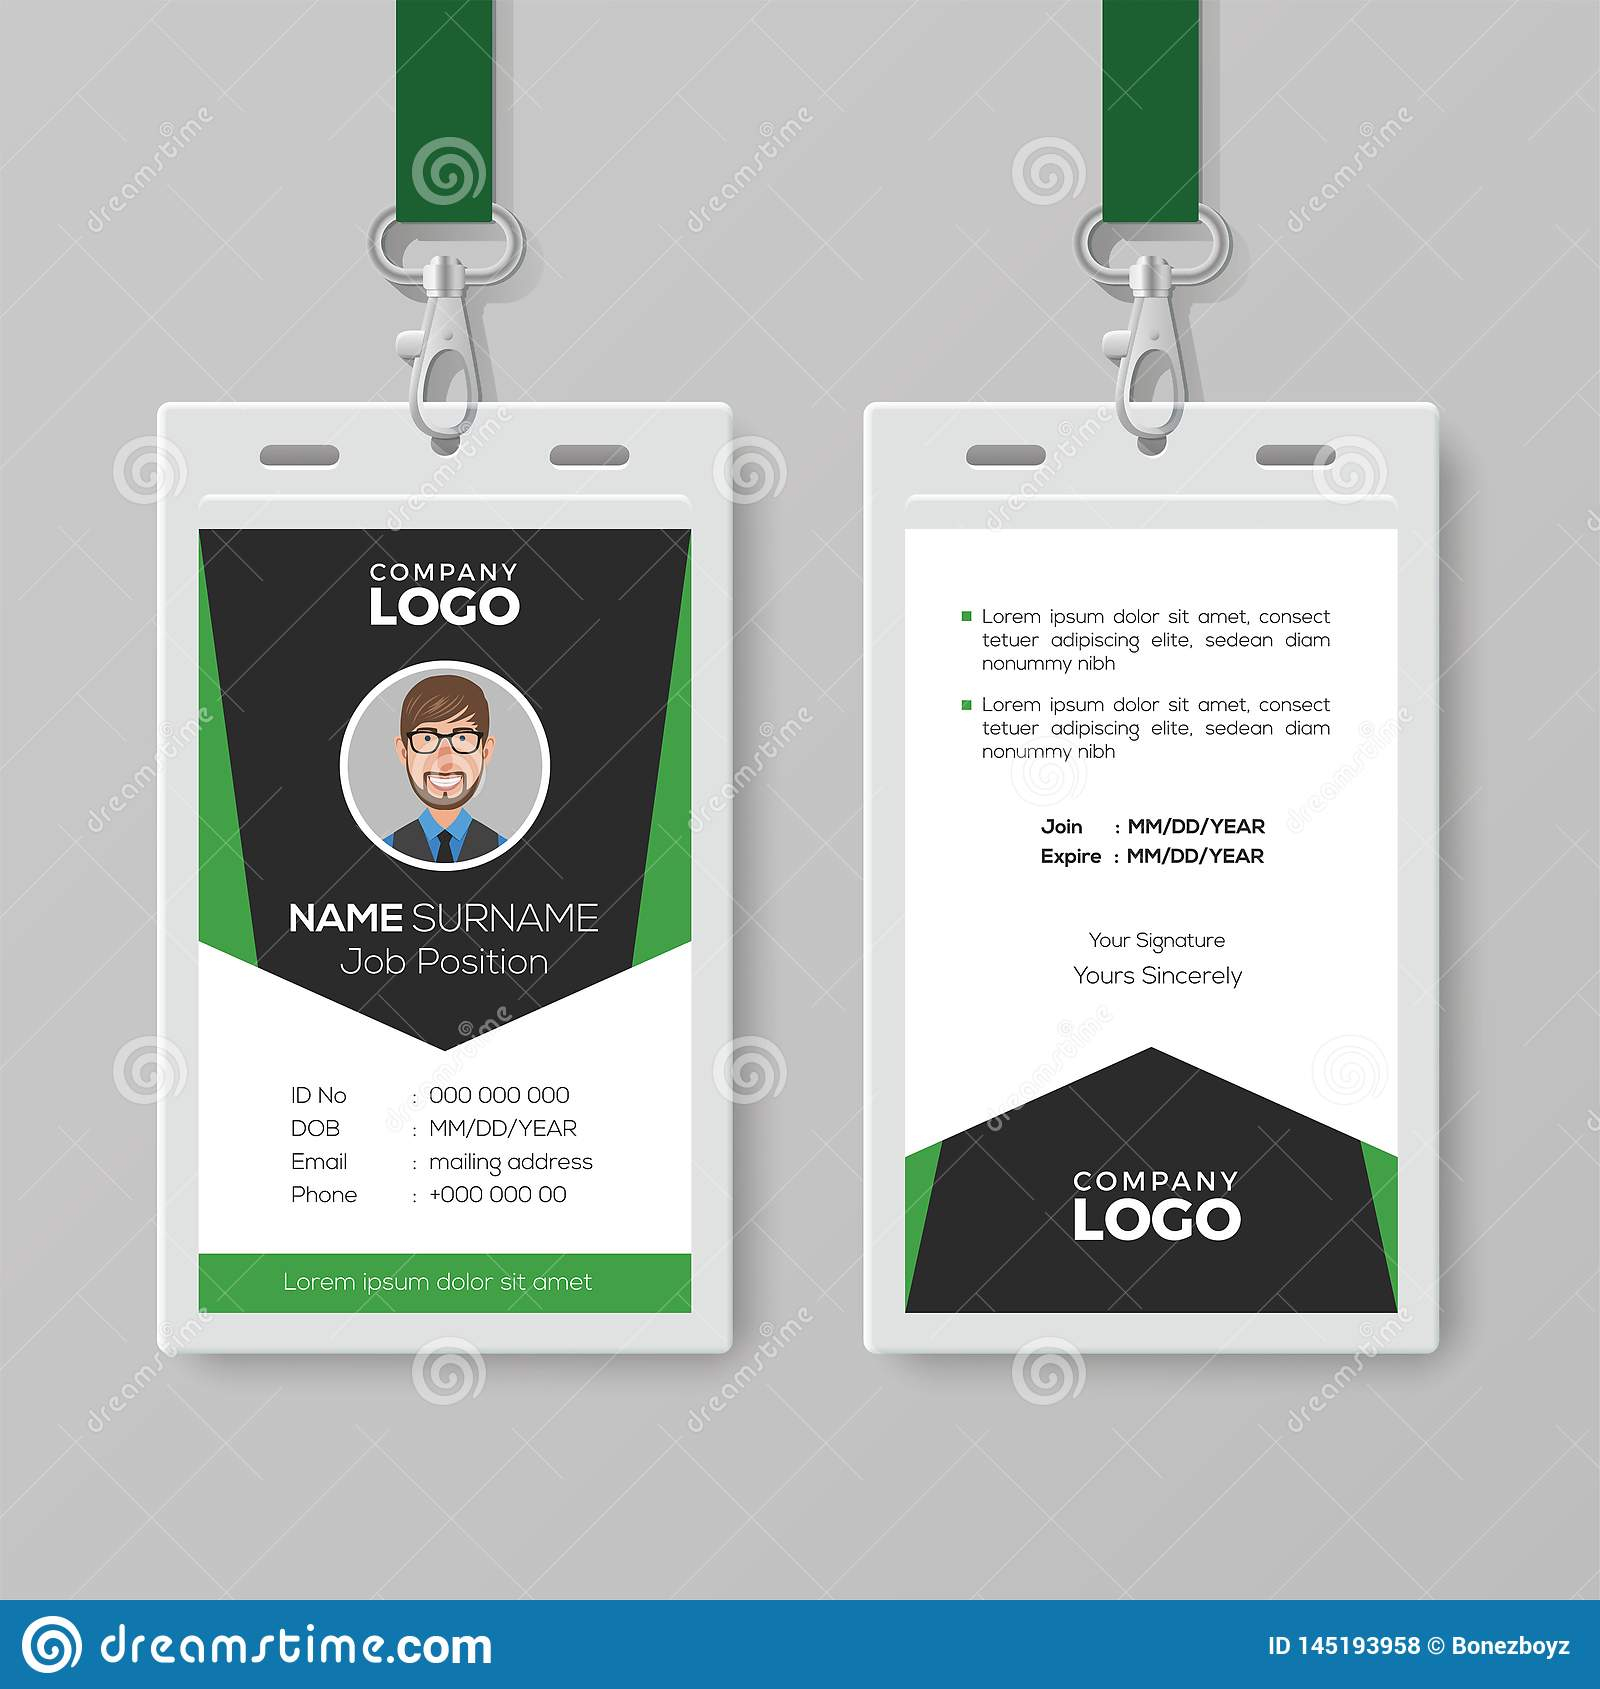 Creative Corporate Id Card Template With Green Details Stock Within Work Id Card Template